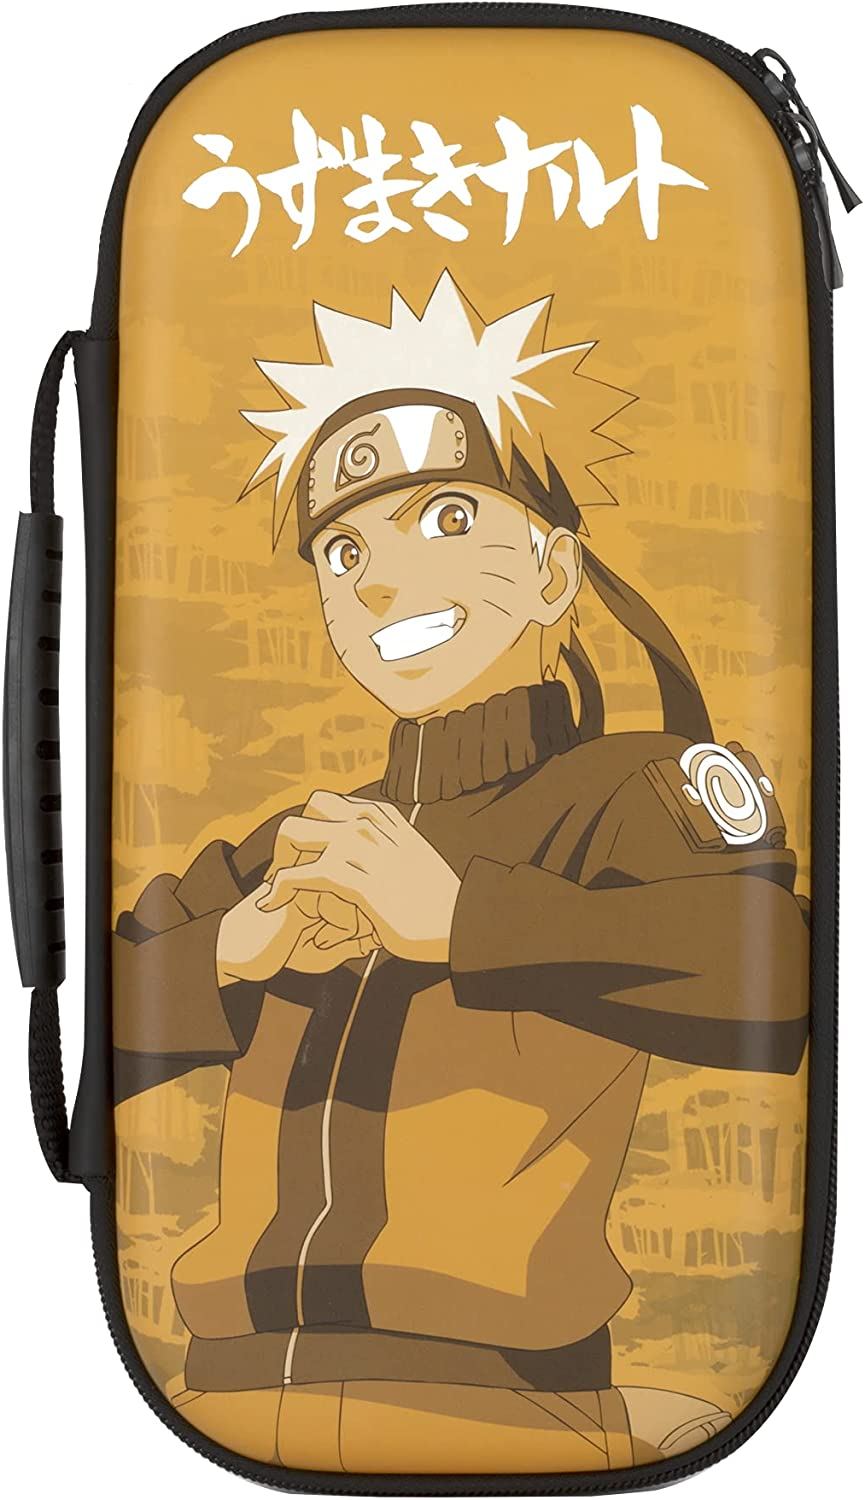 Konix Naruto Switch Protective Case for Nintendo Switch for